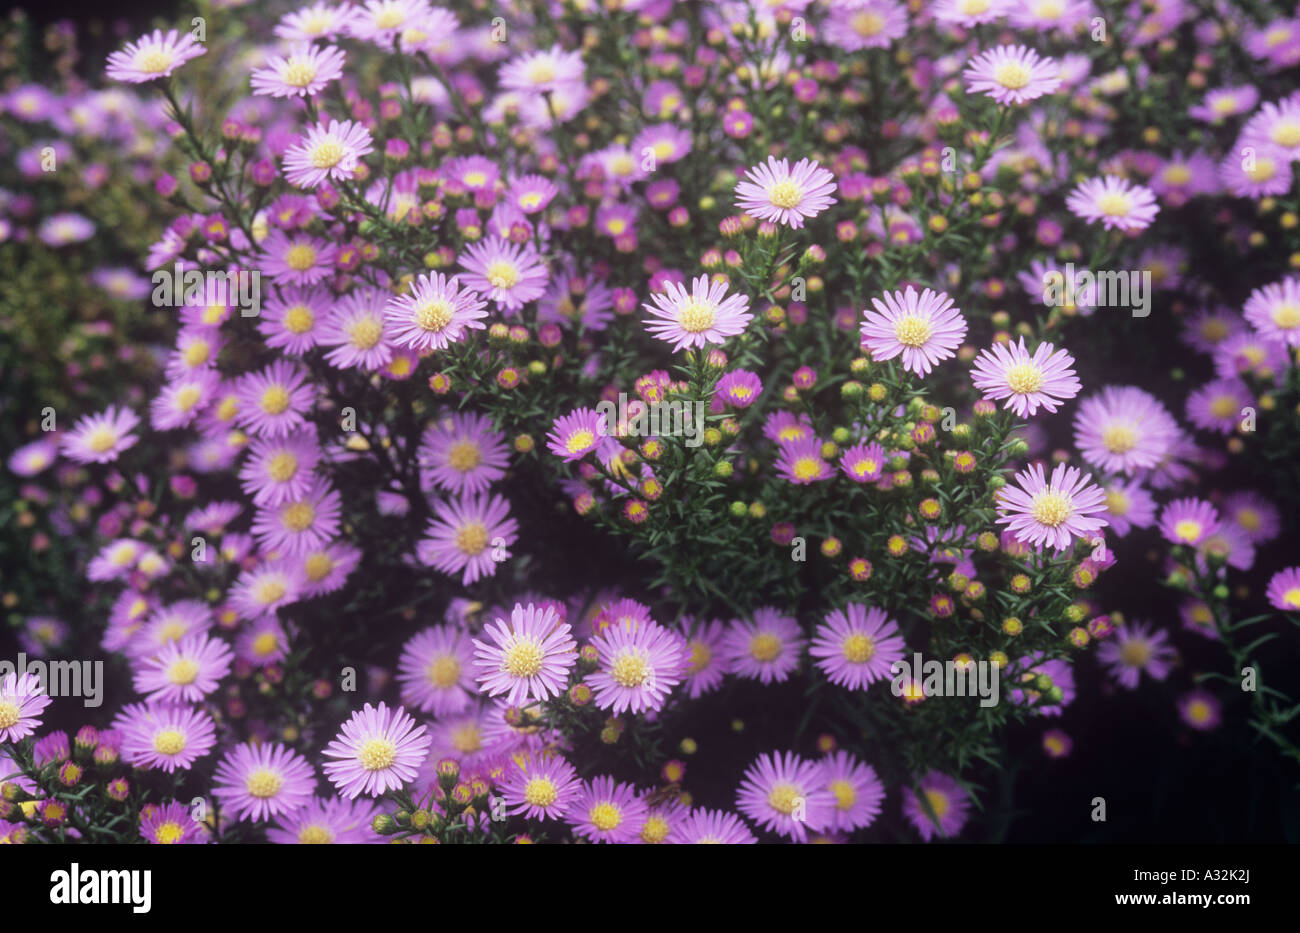 Part of a prolific border perennial Michaelmas daisy or Aster plant bearing hundreds of pink and yellow flowers Stock Photo